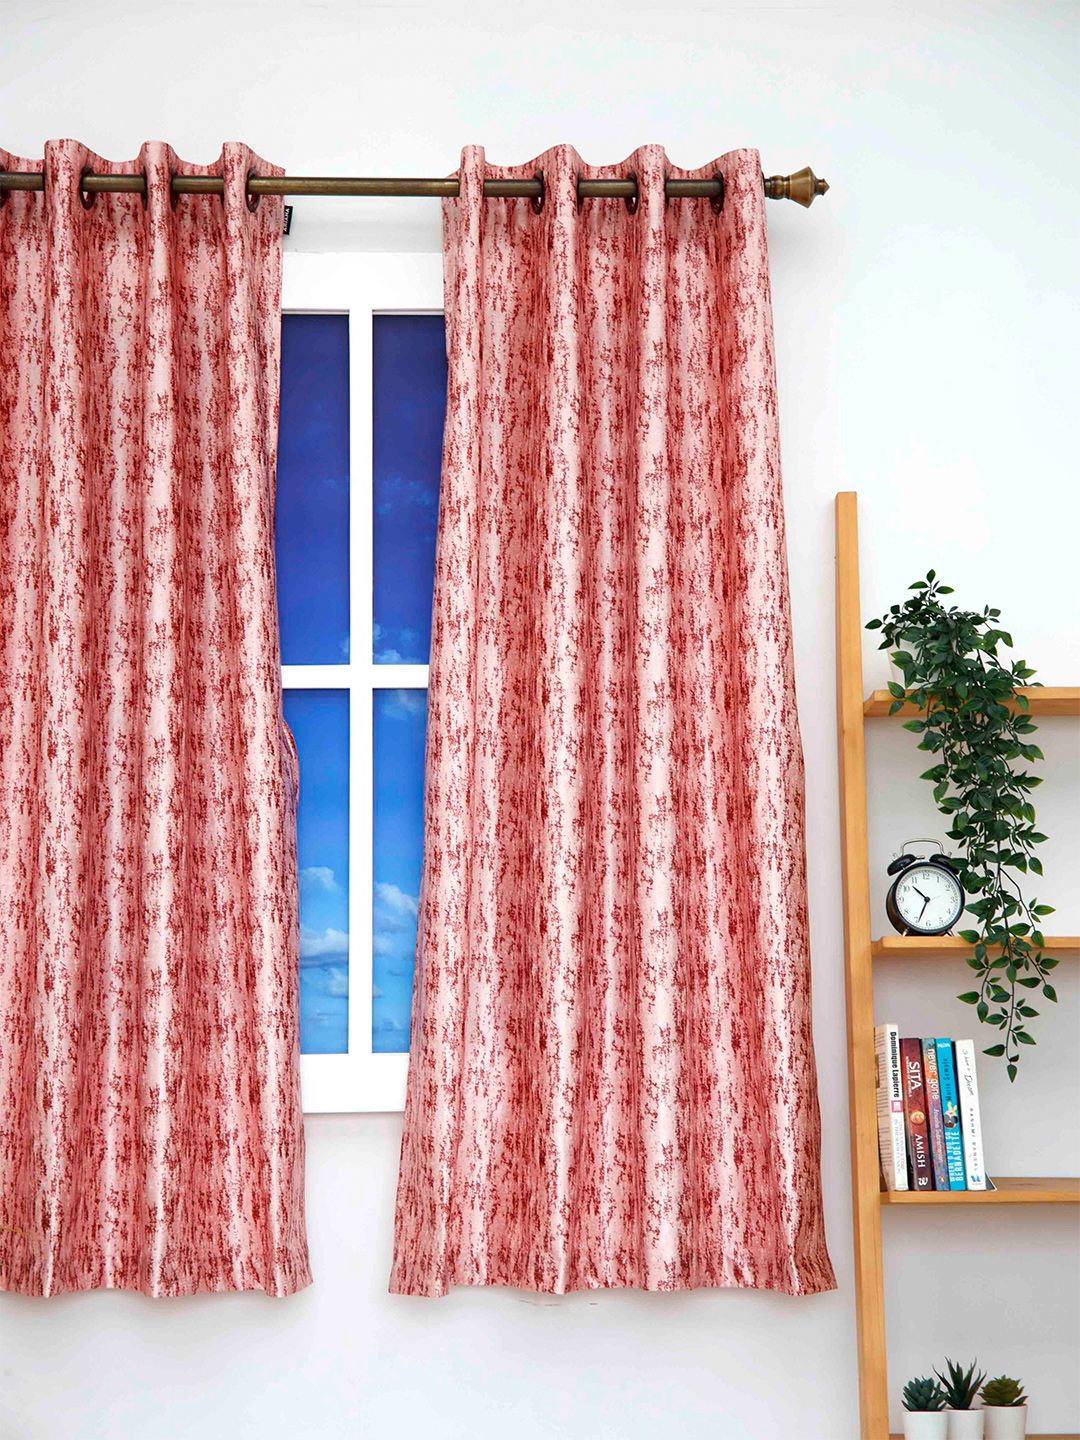 Ariana Black Out Window Curtain Price in India